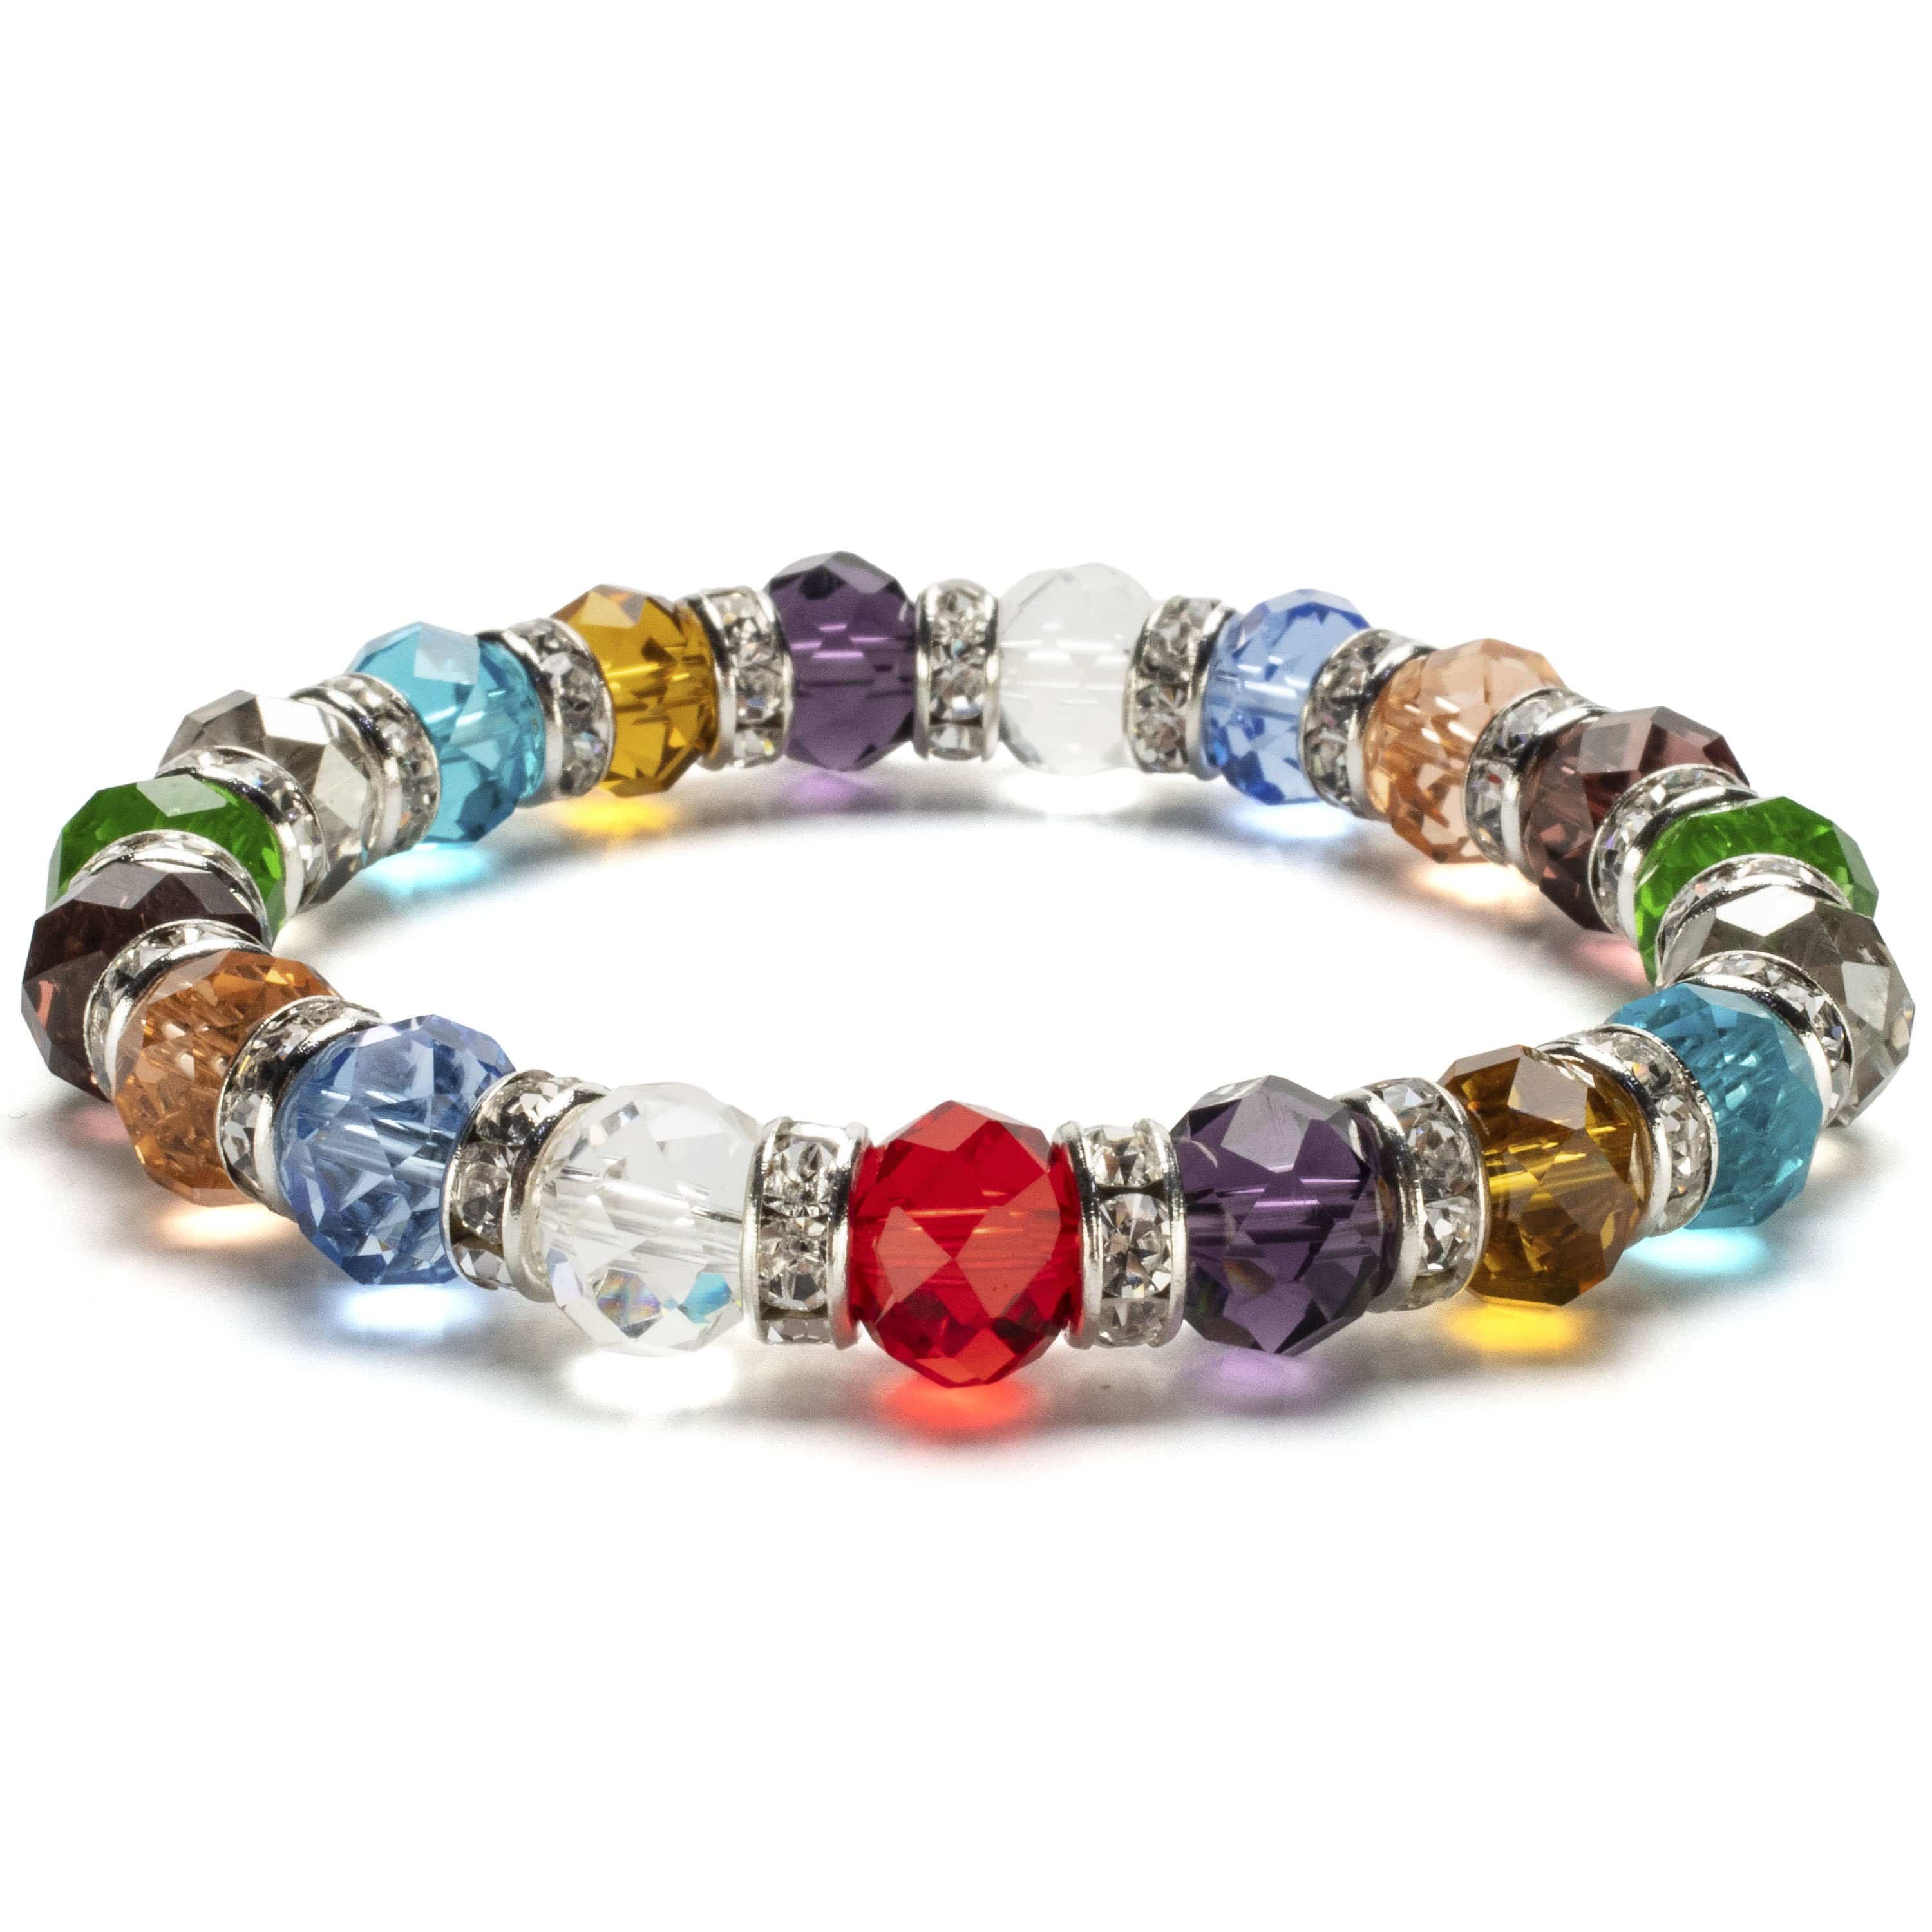 Kalifano Gorgeous Glass Jewelry Multi-Colored Gorgeous Glass Bracelet with Cubic Zirconia Crystals BLUE-BGG-01